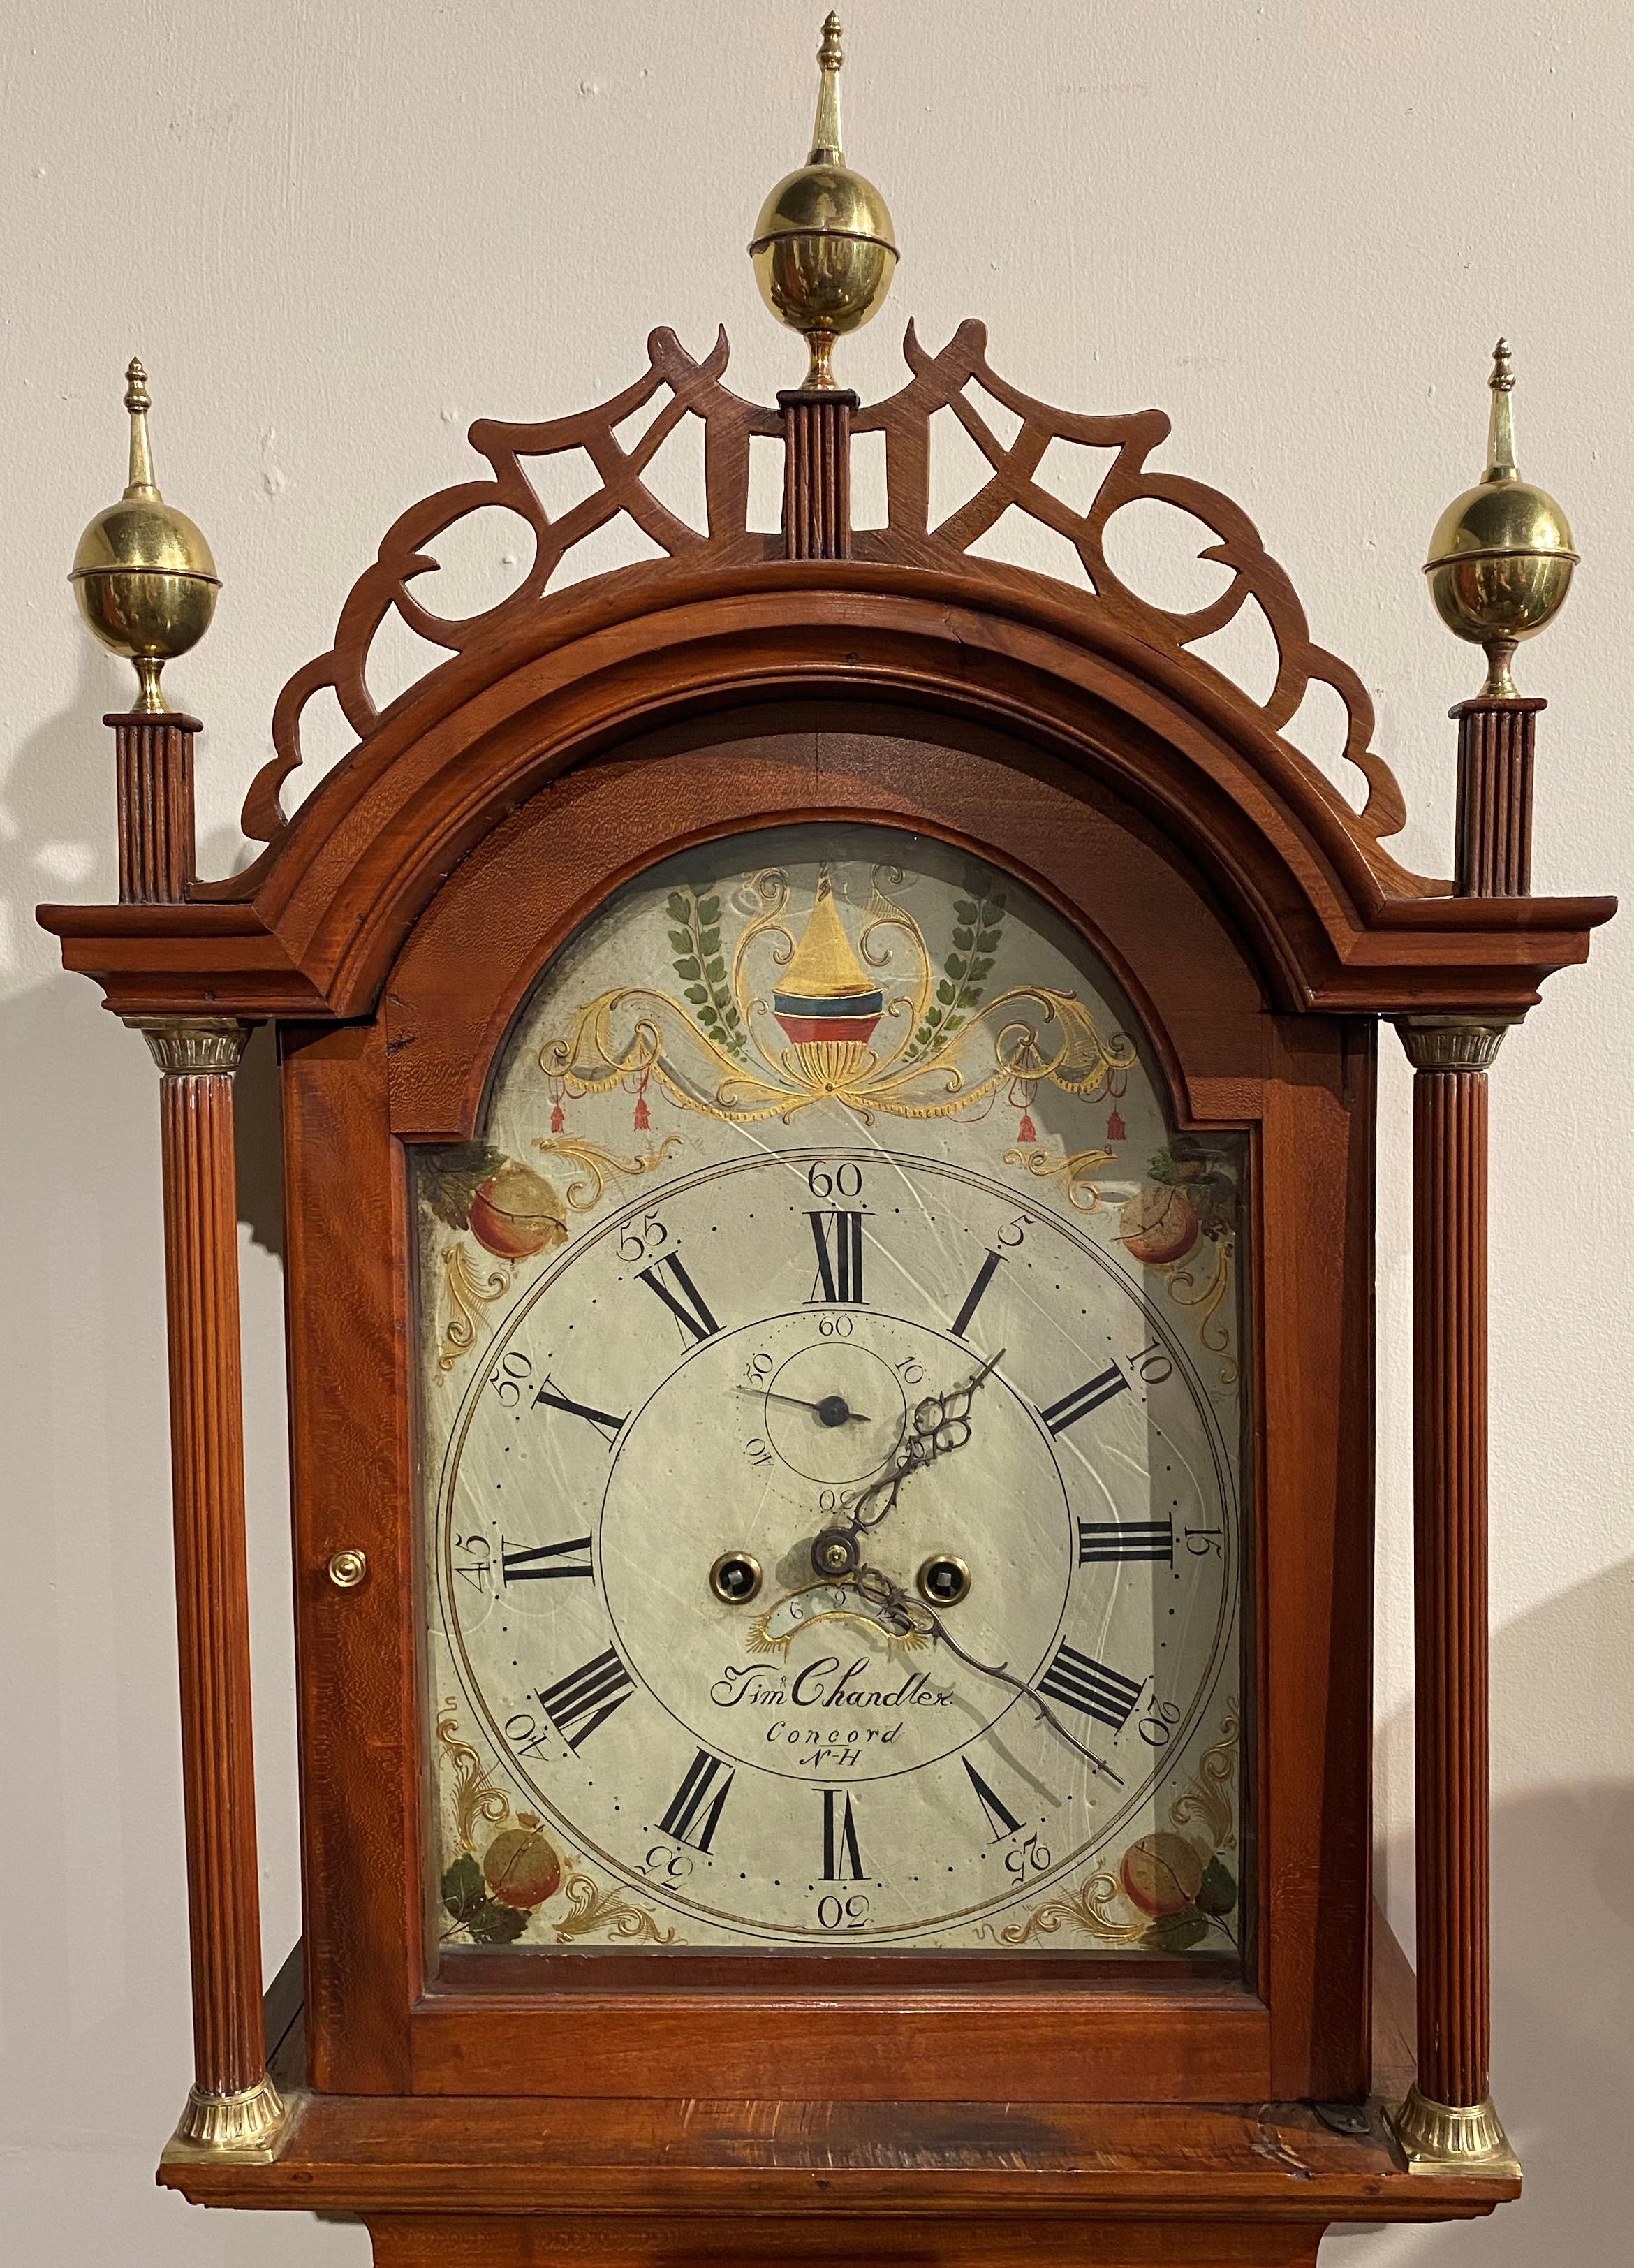 A fine New Hampshire Federal cherry tall case clock with 8-day weight-driven brass works by Timothy Chandler, active clockmaker in Concord, NH from the 1780’s until the end of the first quarter of the 19th century. In 1797, Chandler enlisted with